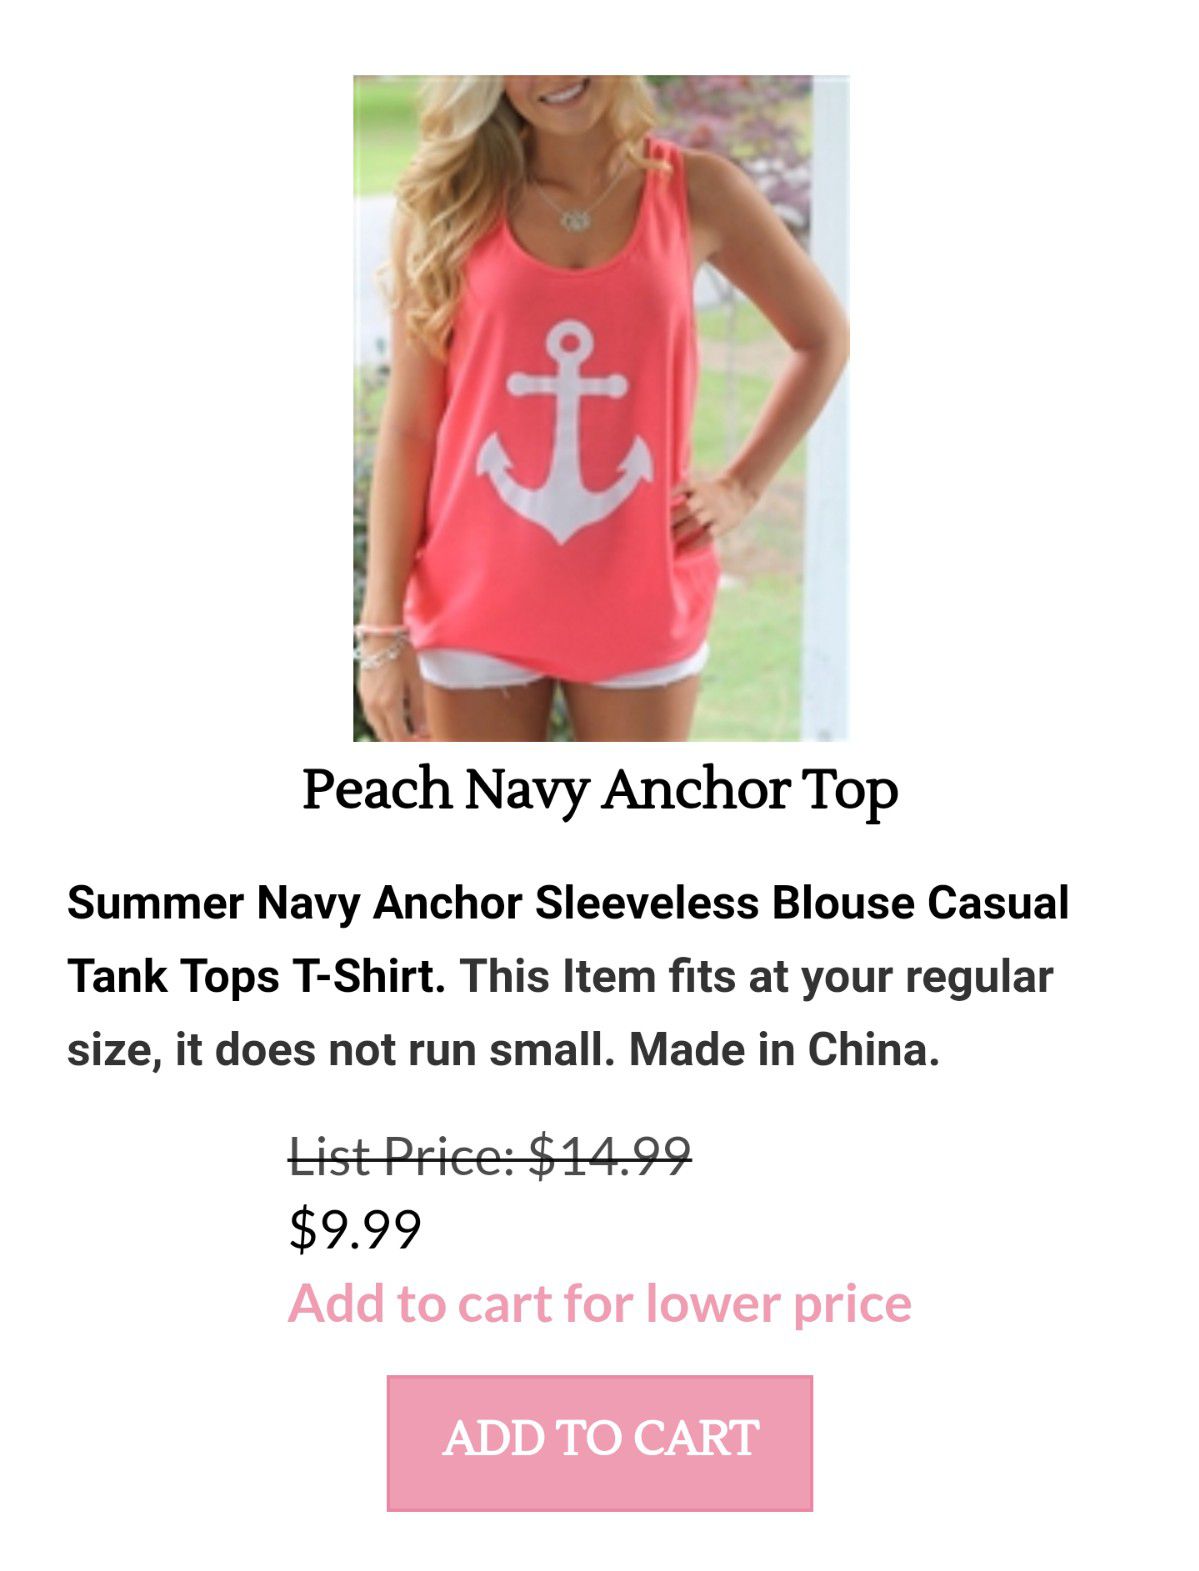 Peach anchor top available in small